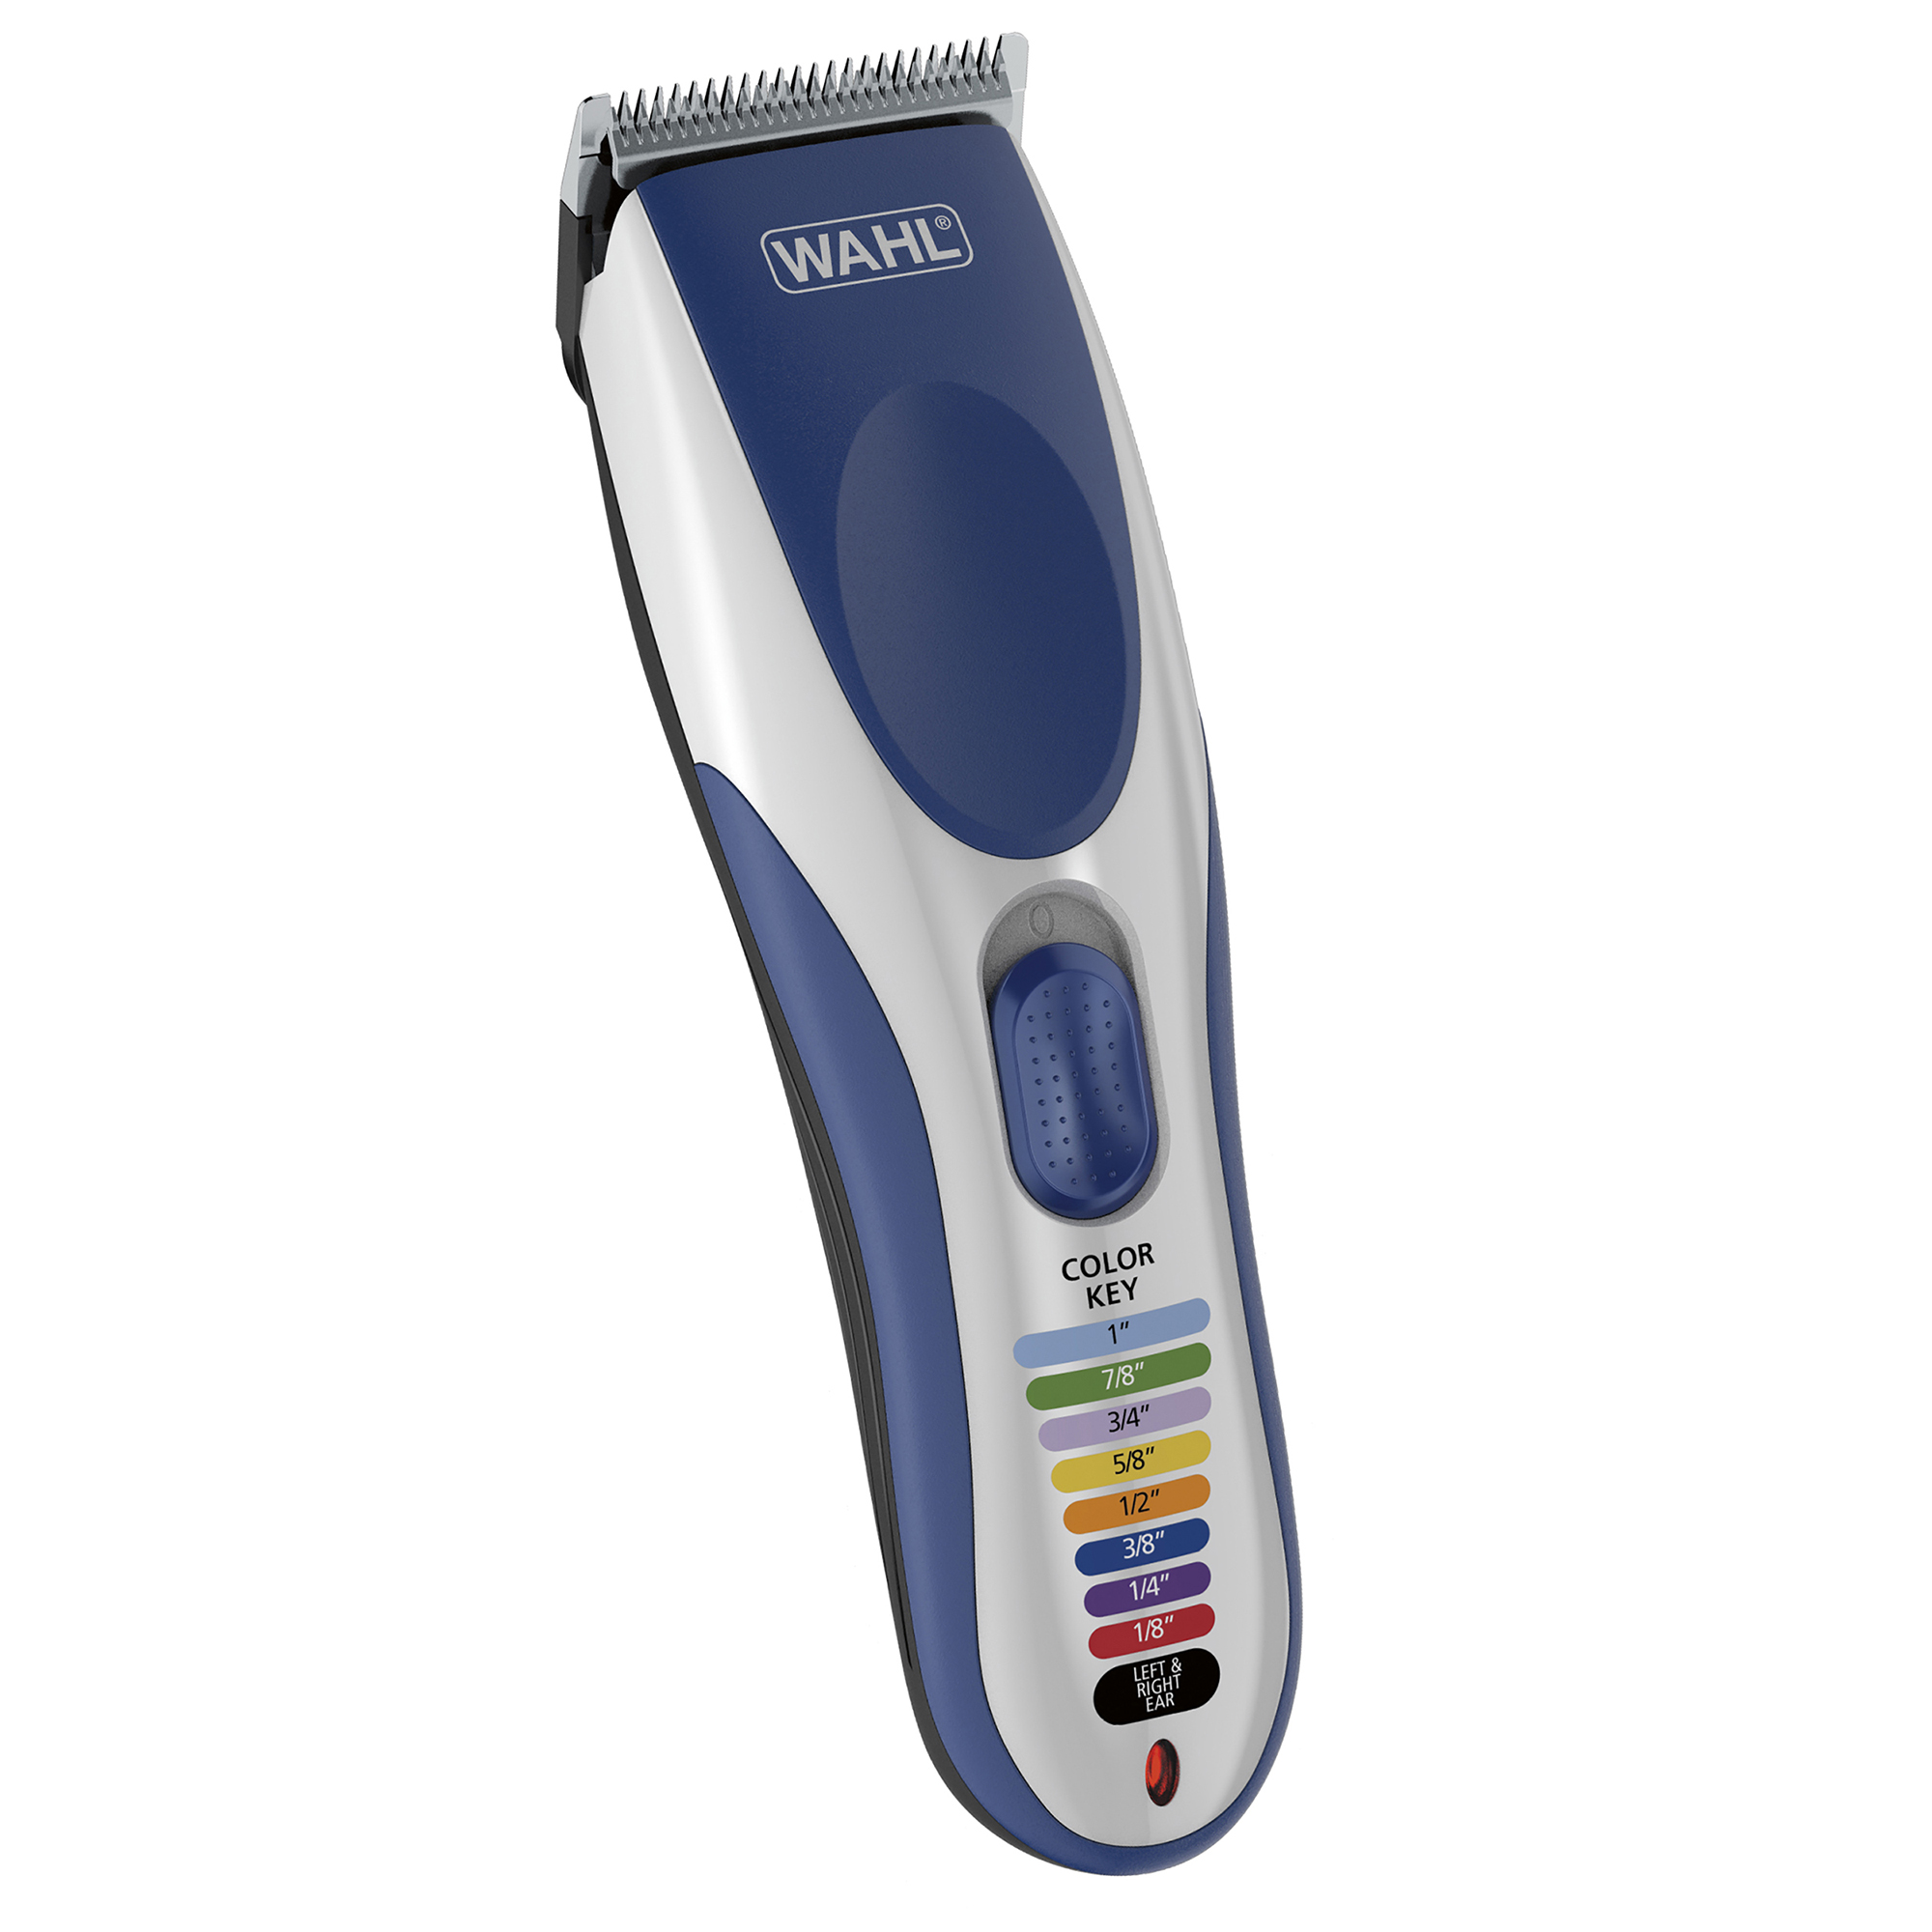 wahl color pro cordless rechargeable hair clipper & trimmer model 9649